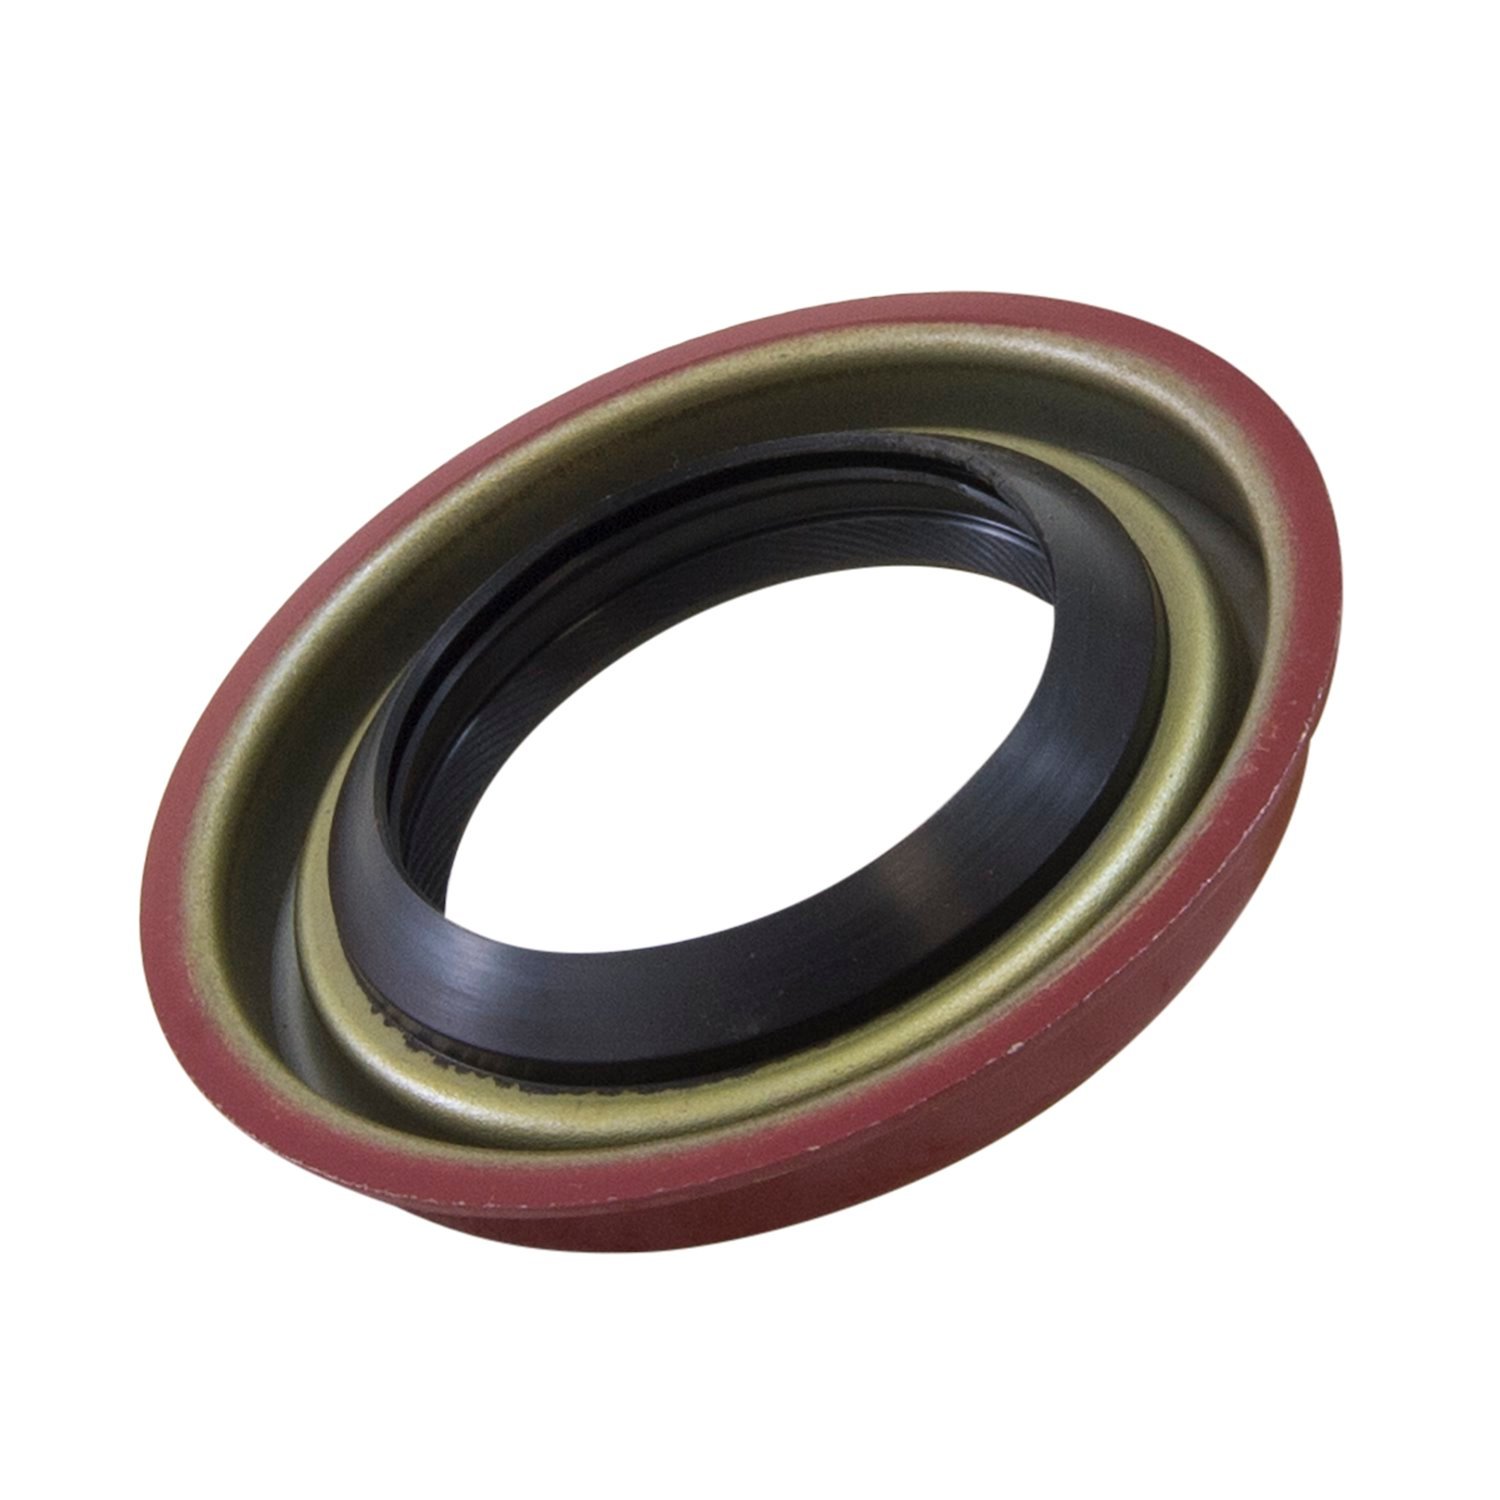 Pinion Seal For 7.5 in., 8.8 in., And 9.75 in. Ford, And Also 1985-'86 9 in. Ford